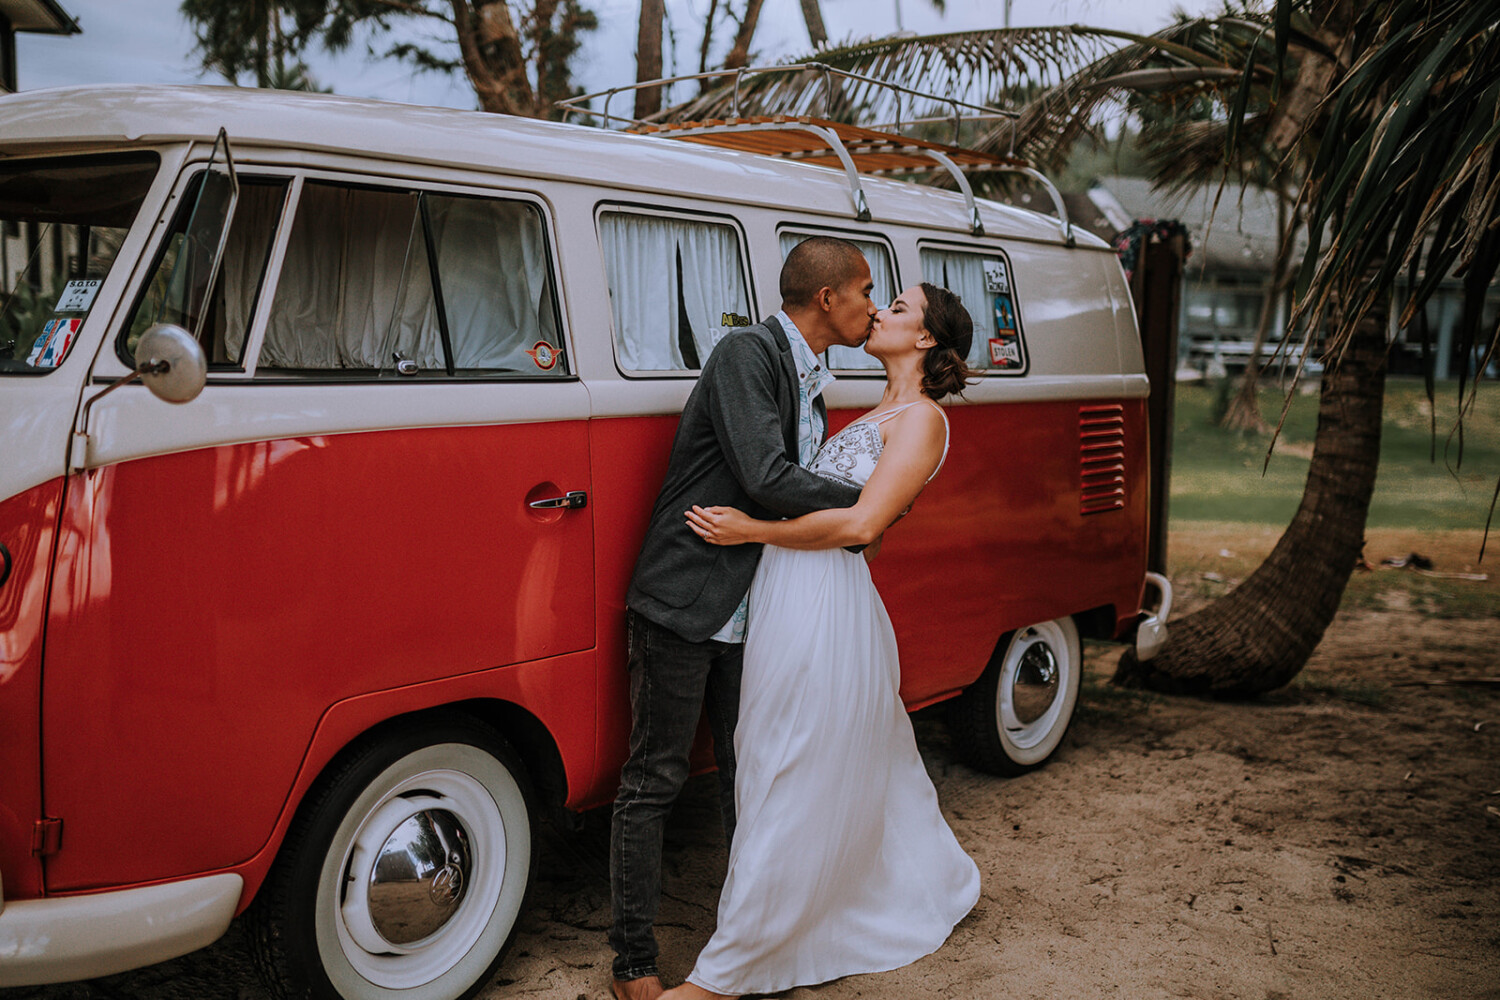 How to Elope on Oahu, Hawaii by Anela Benavides Photography. Includes posing inspiration for an elopement & elopement planning tips. Book your couples session and browse the blog for more inspiration #elopement #photography #elopementphotography #Hawaiiphotographer #tipsforphotographers